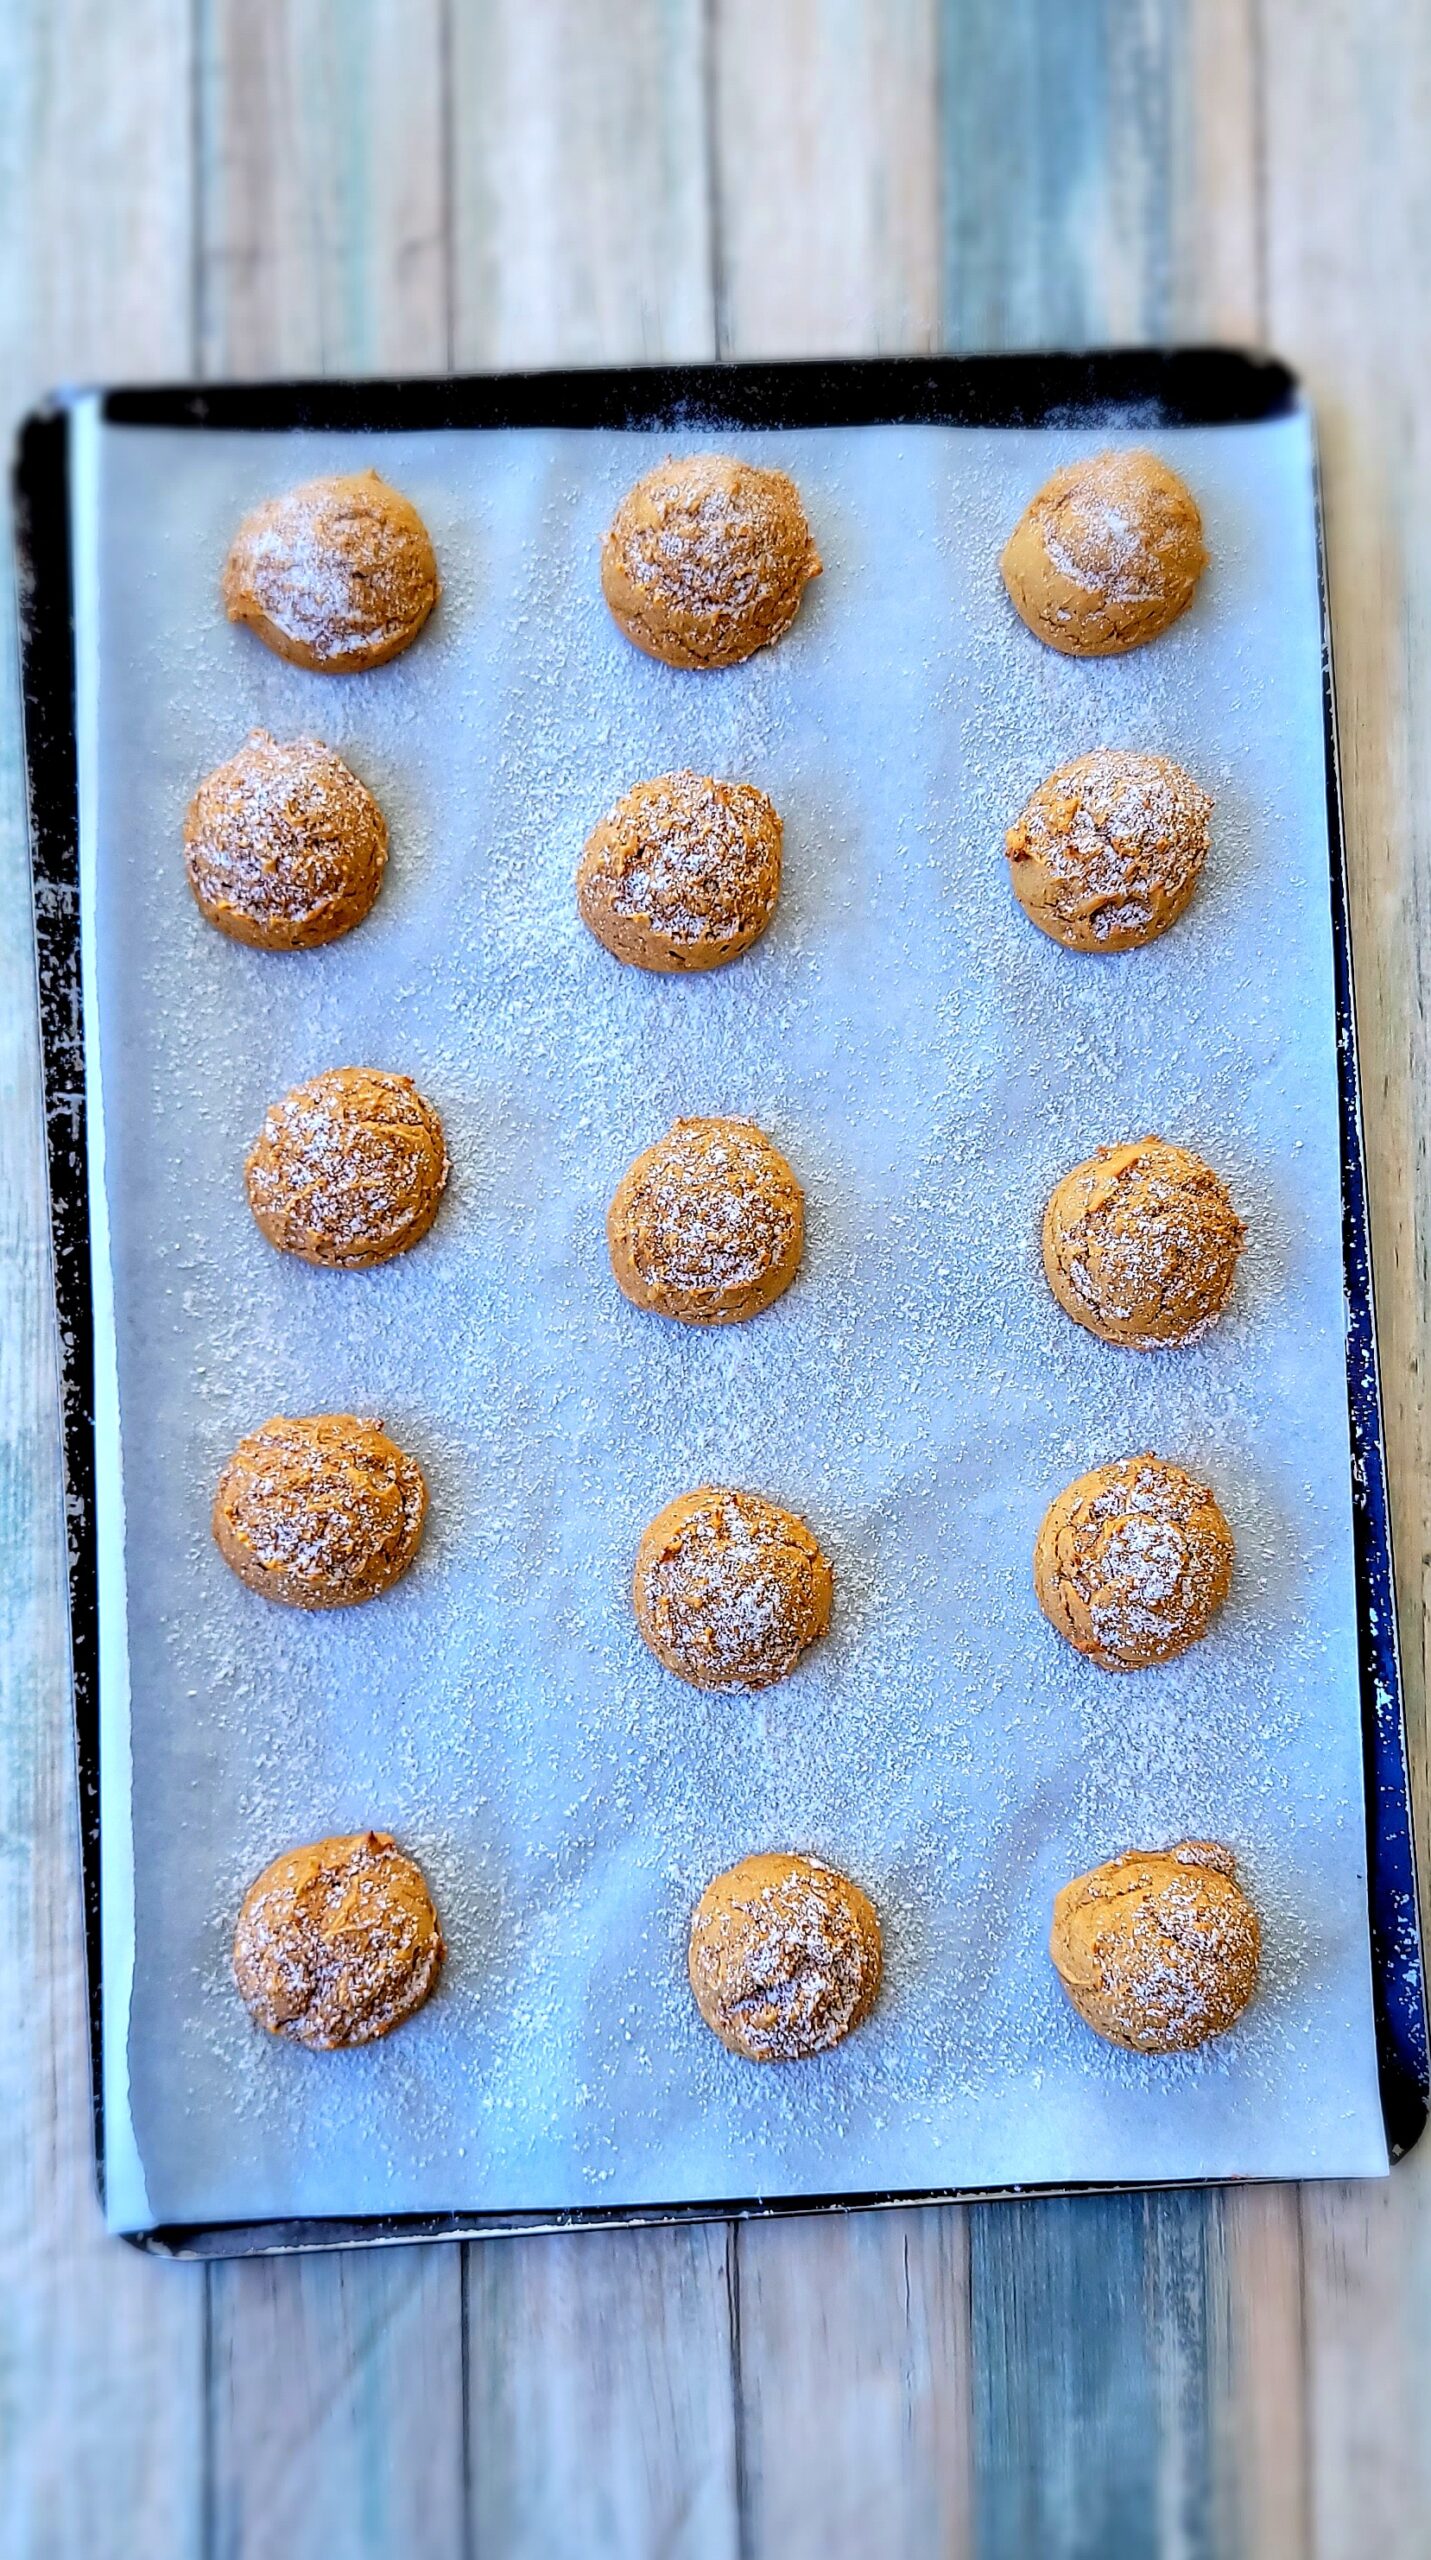 Evenly baked Soft Sweet Potato Cookies